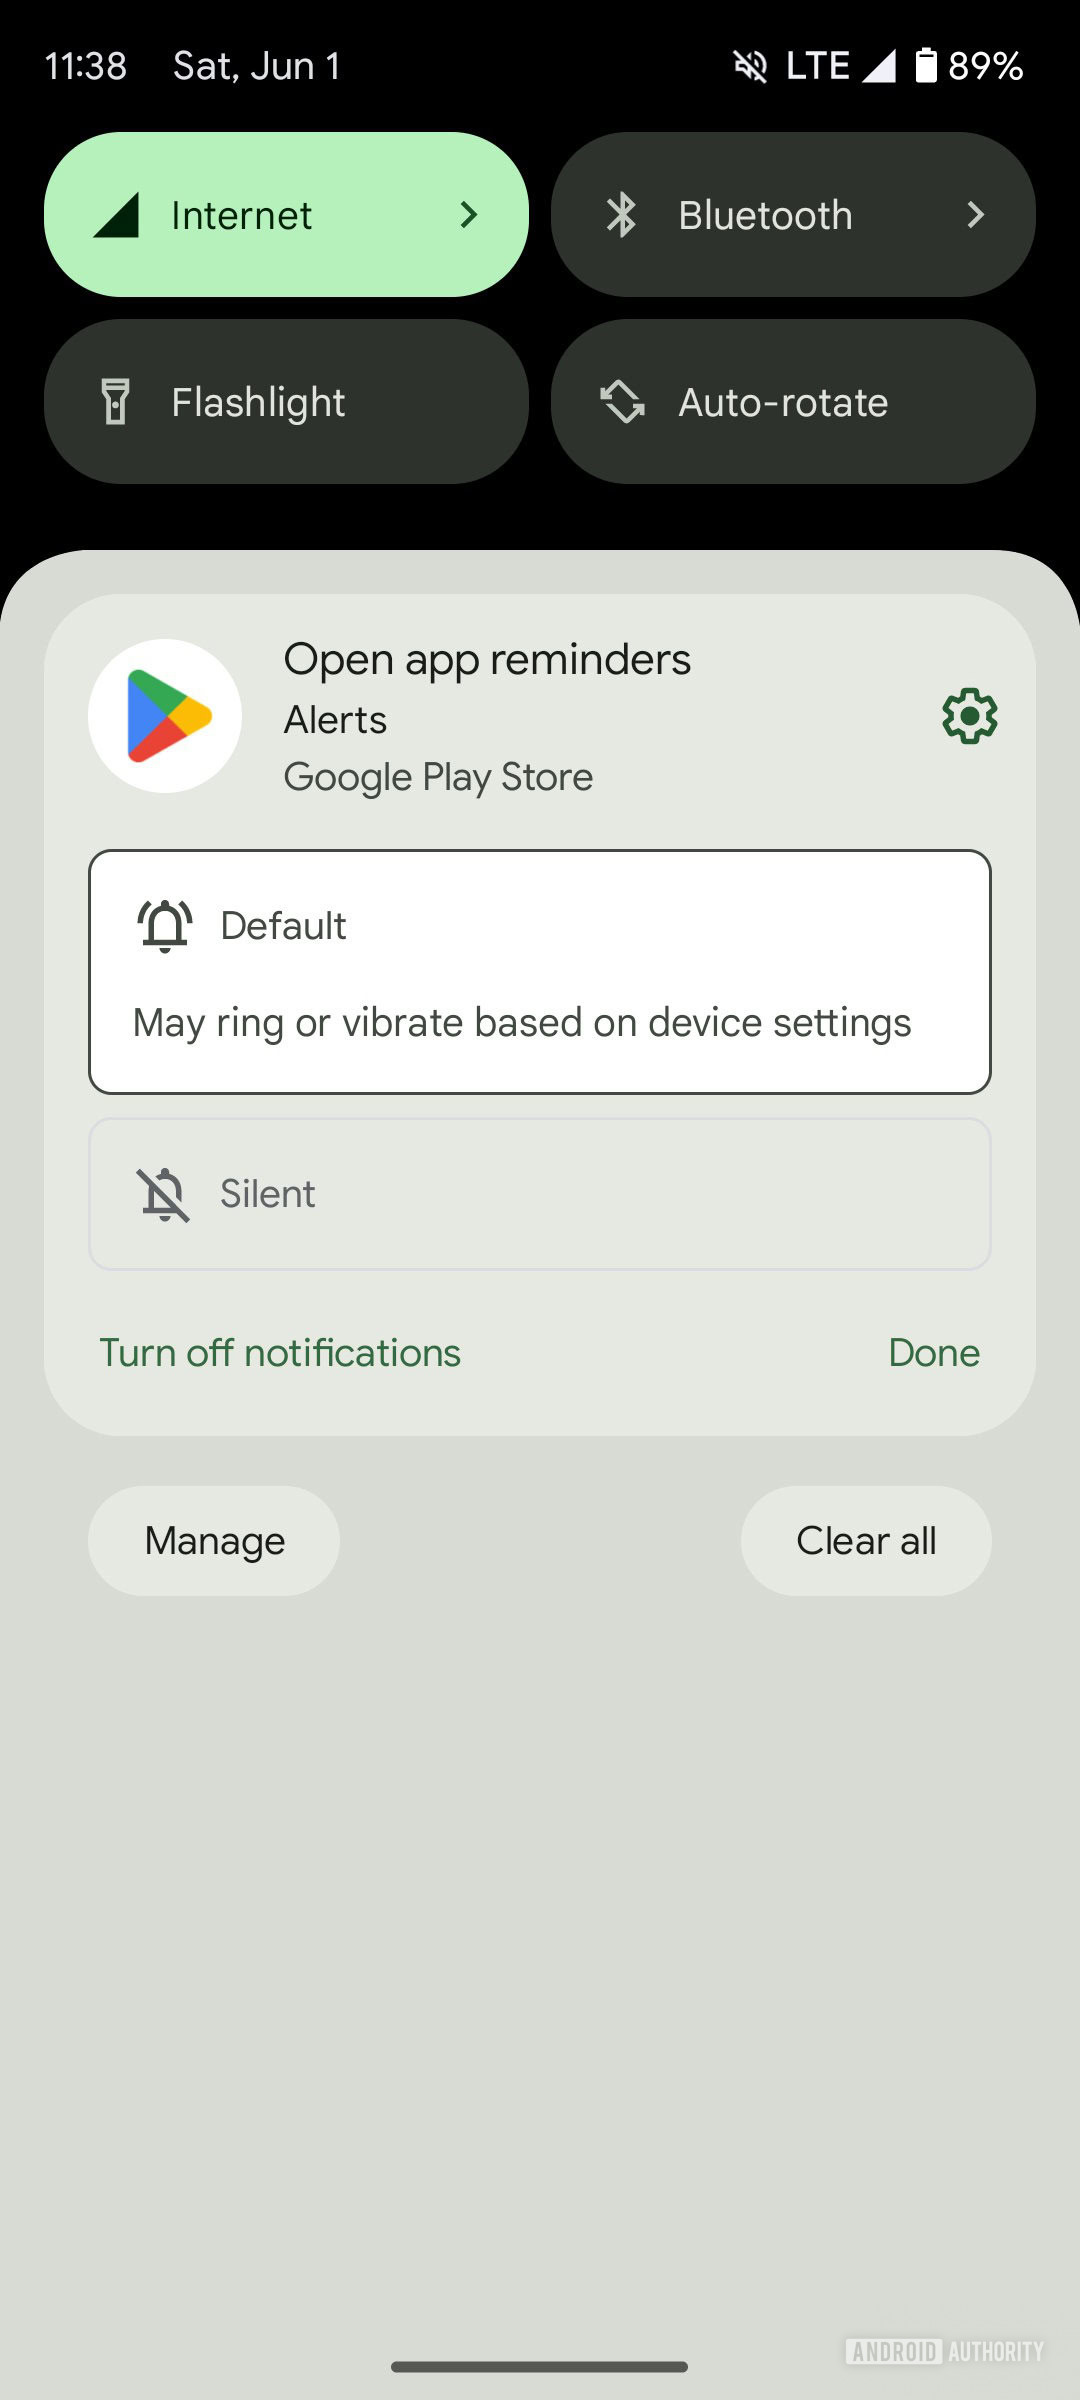 Google Play Store Open App Reminder 3